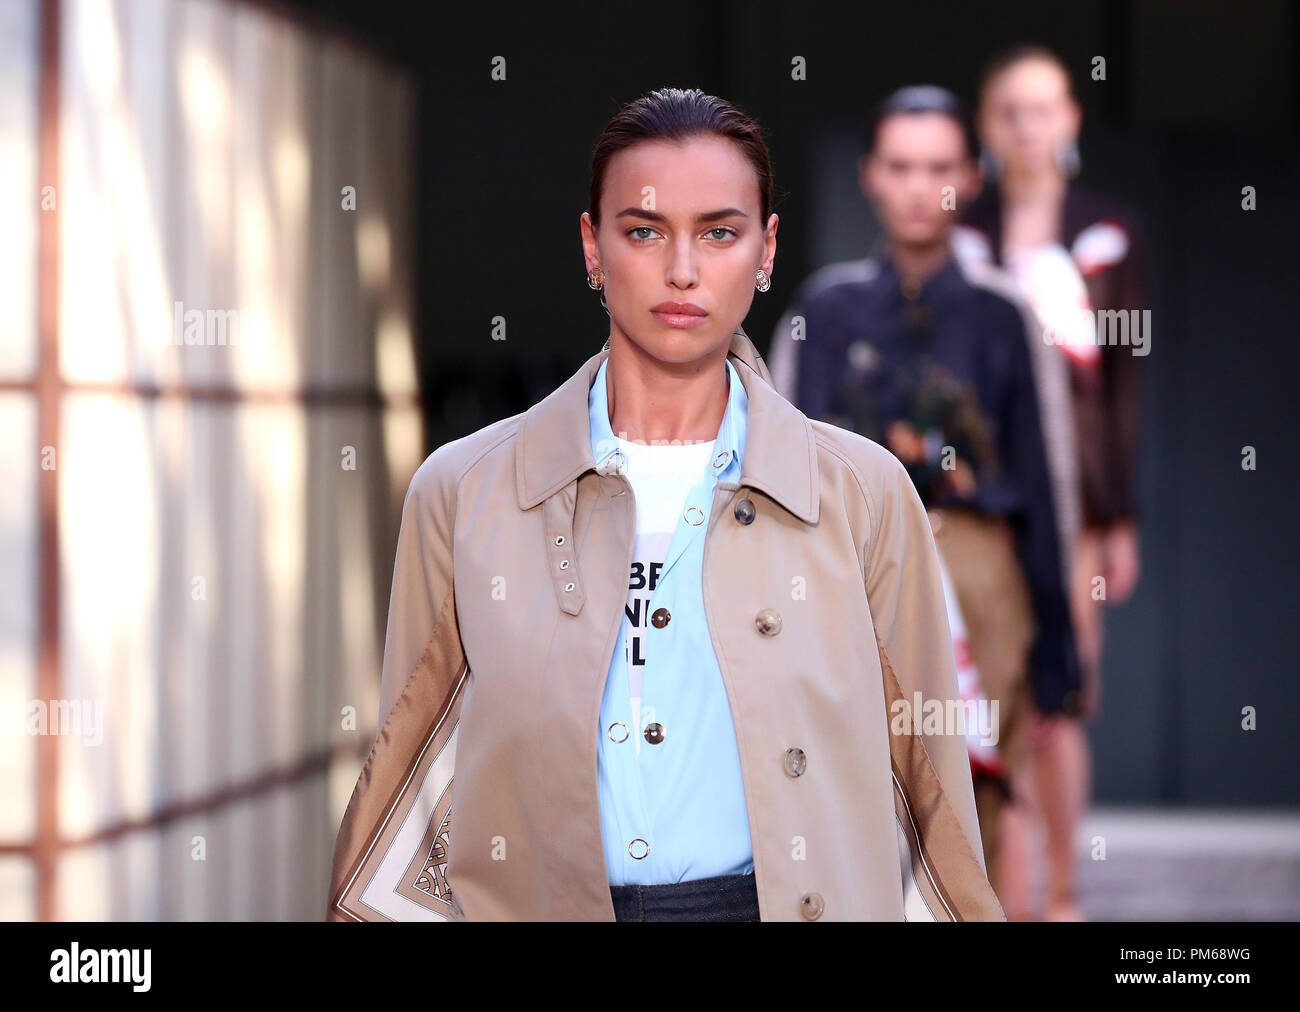 Model Irina Shayk on the catwalk during the Burberry London Fashion Week  SS19 show held at The South London Mail Centre Stock Photo - Alamy